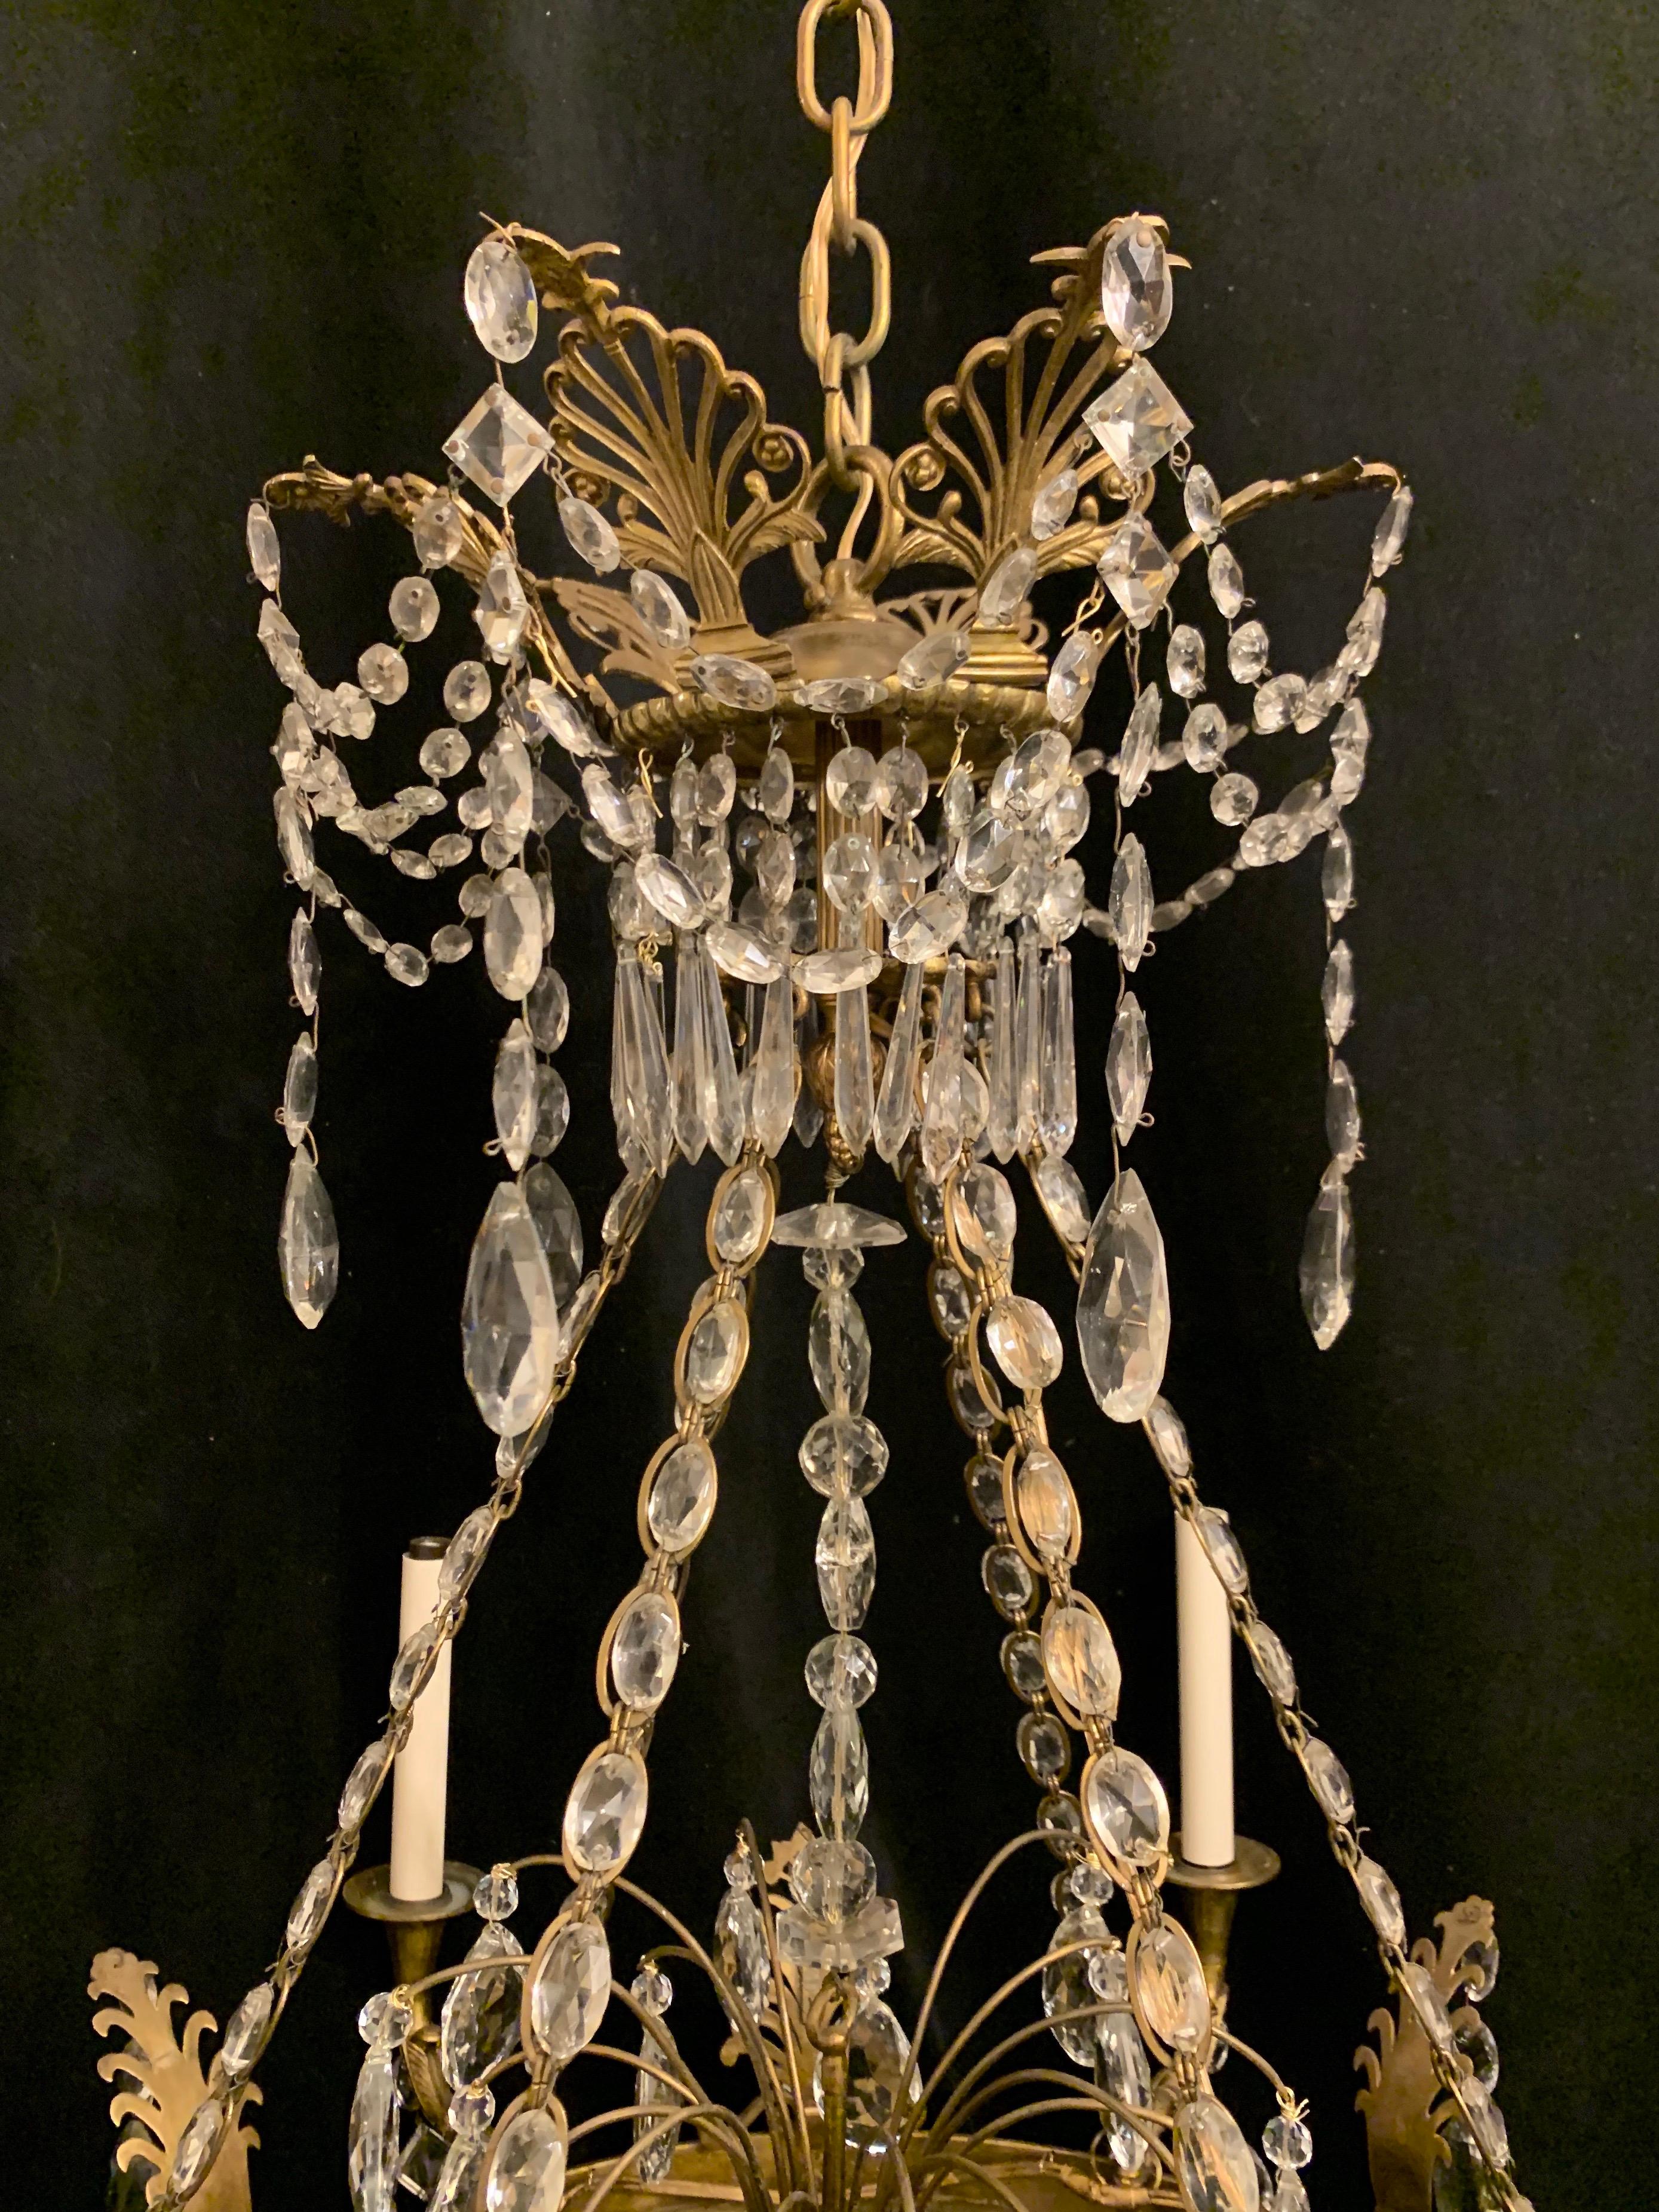 A wonderful empire / neoclassical bronze and crystal swag regency / Baltic style French 6 candelabras light chandelier, wiring has been updated and comes with chain canopy and mounting hardware for installation.